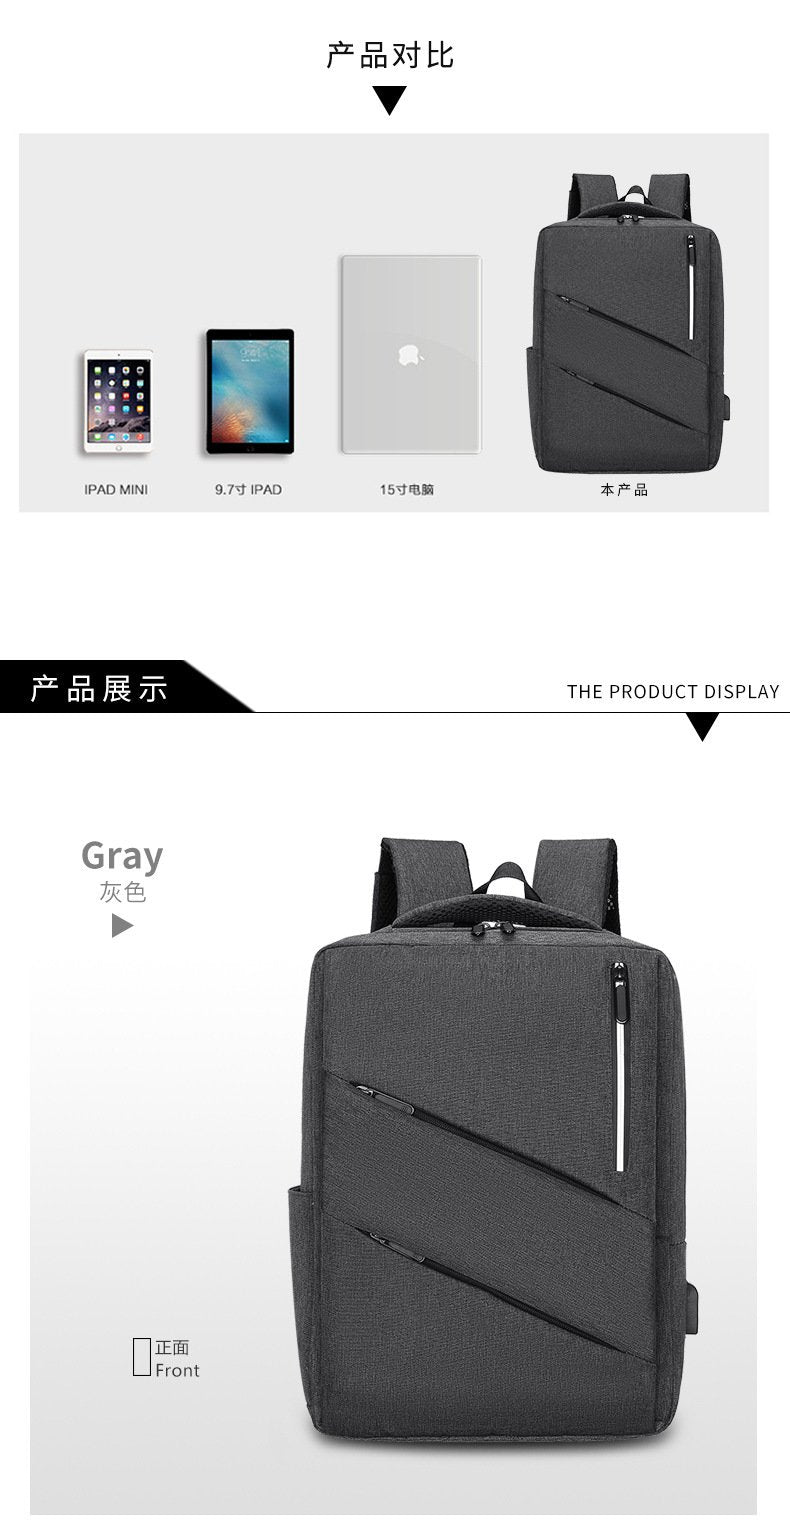 Yokai Japanese Backpack 15.6 inch Men Military Grade Backpack Water Resistant USB Charger Port